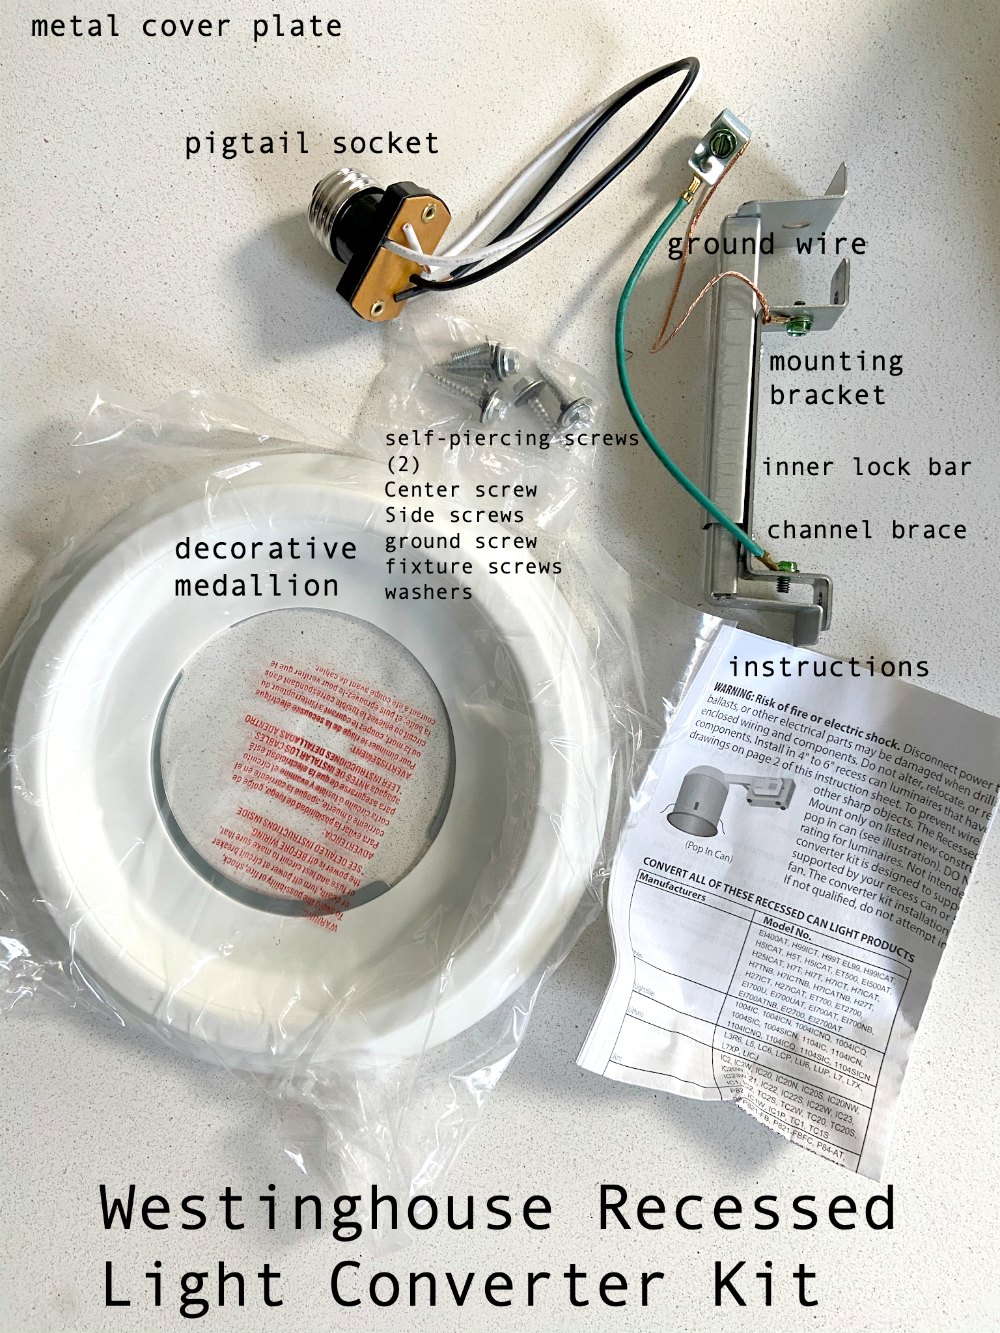 westinghouse light converter kit lets you change out a recessed can light fixture for a pendant or chandelier with no remodeling. 